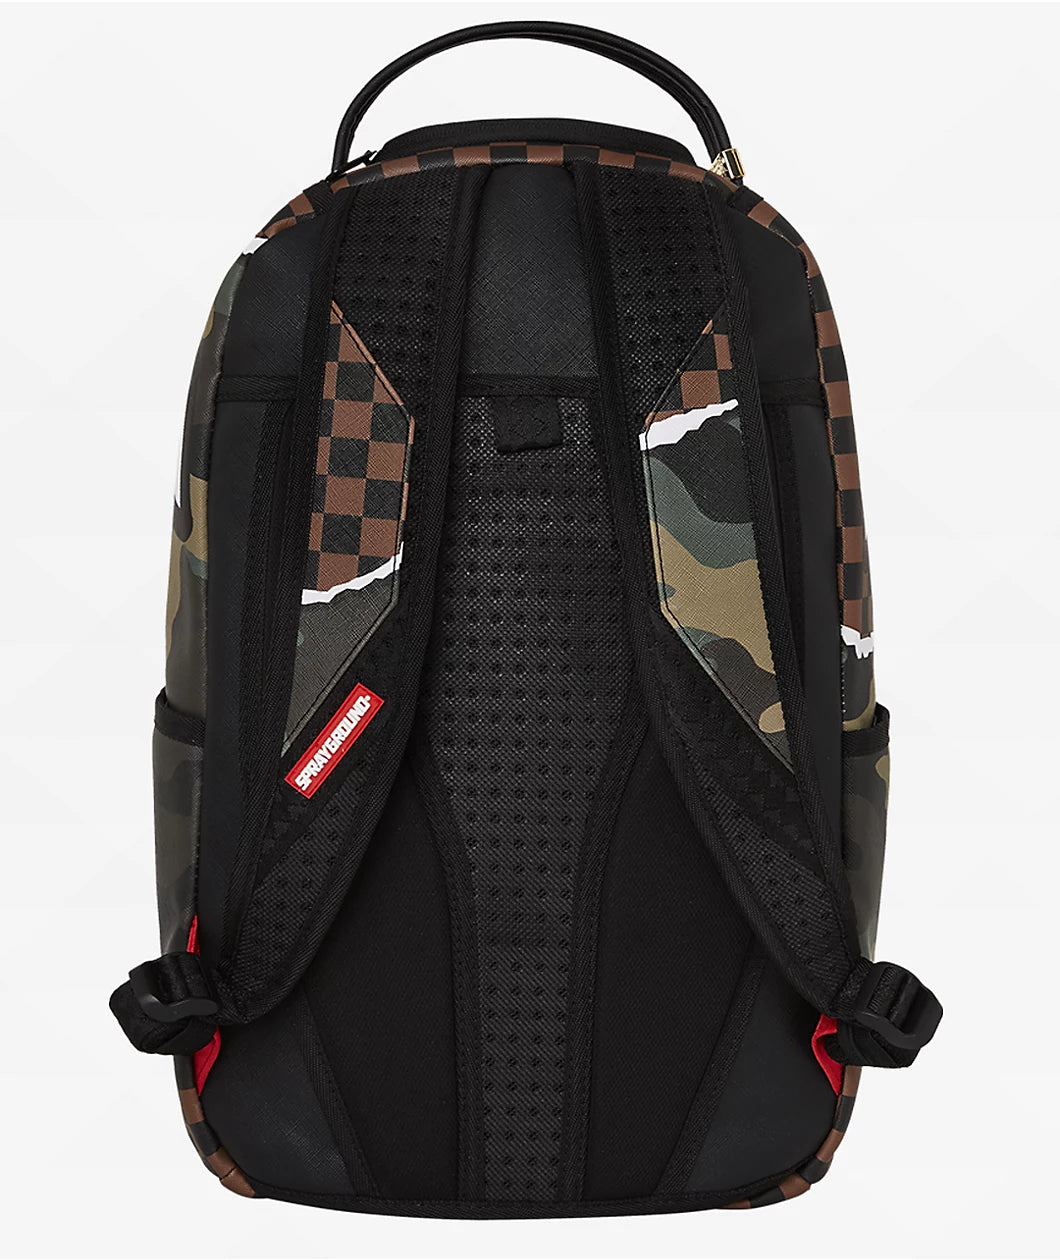 TEAR IT UP CHECK BACKPACK